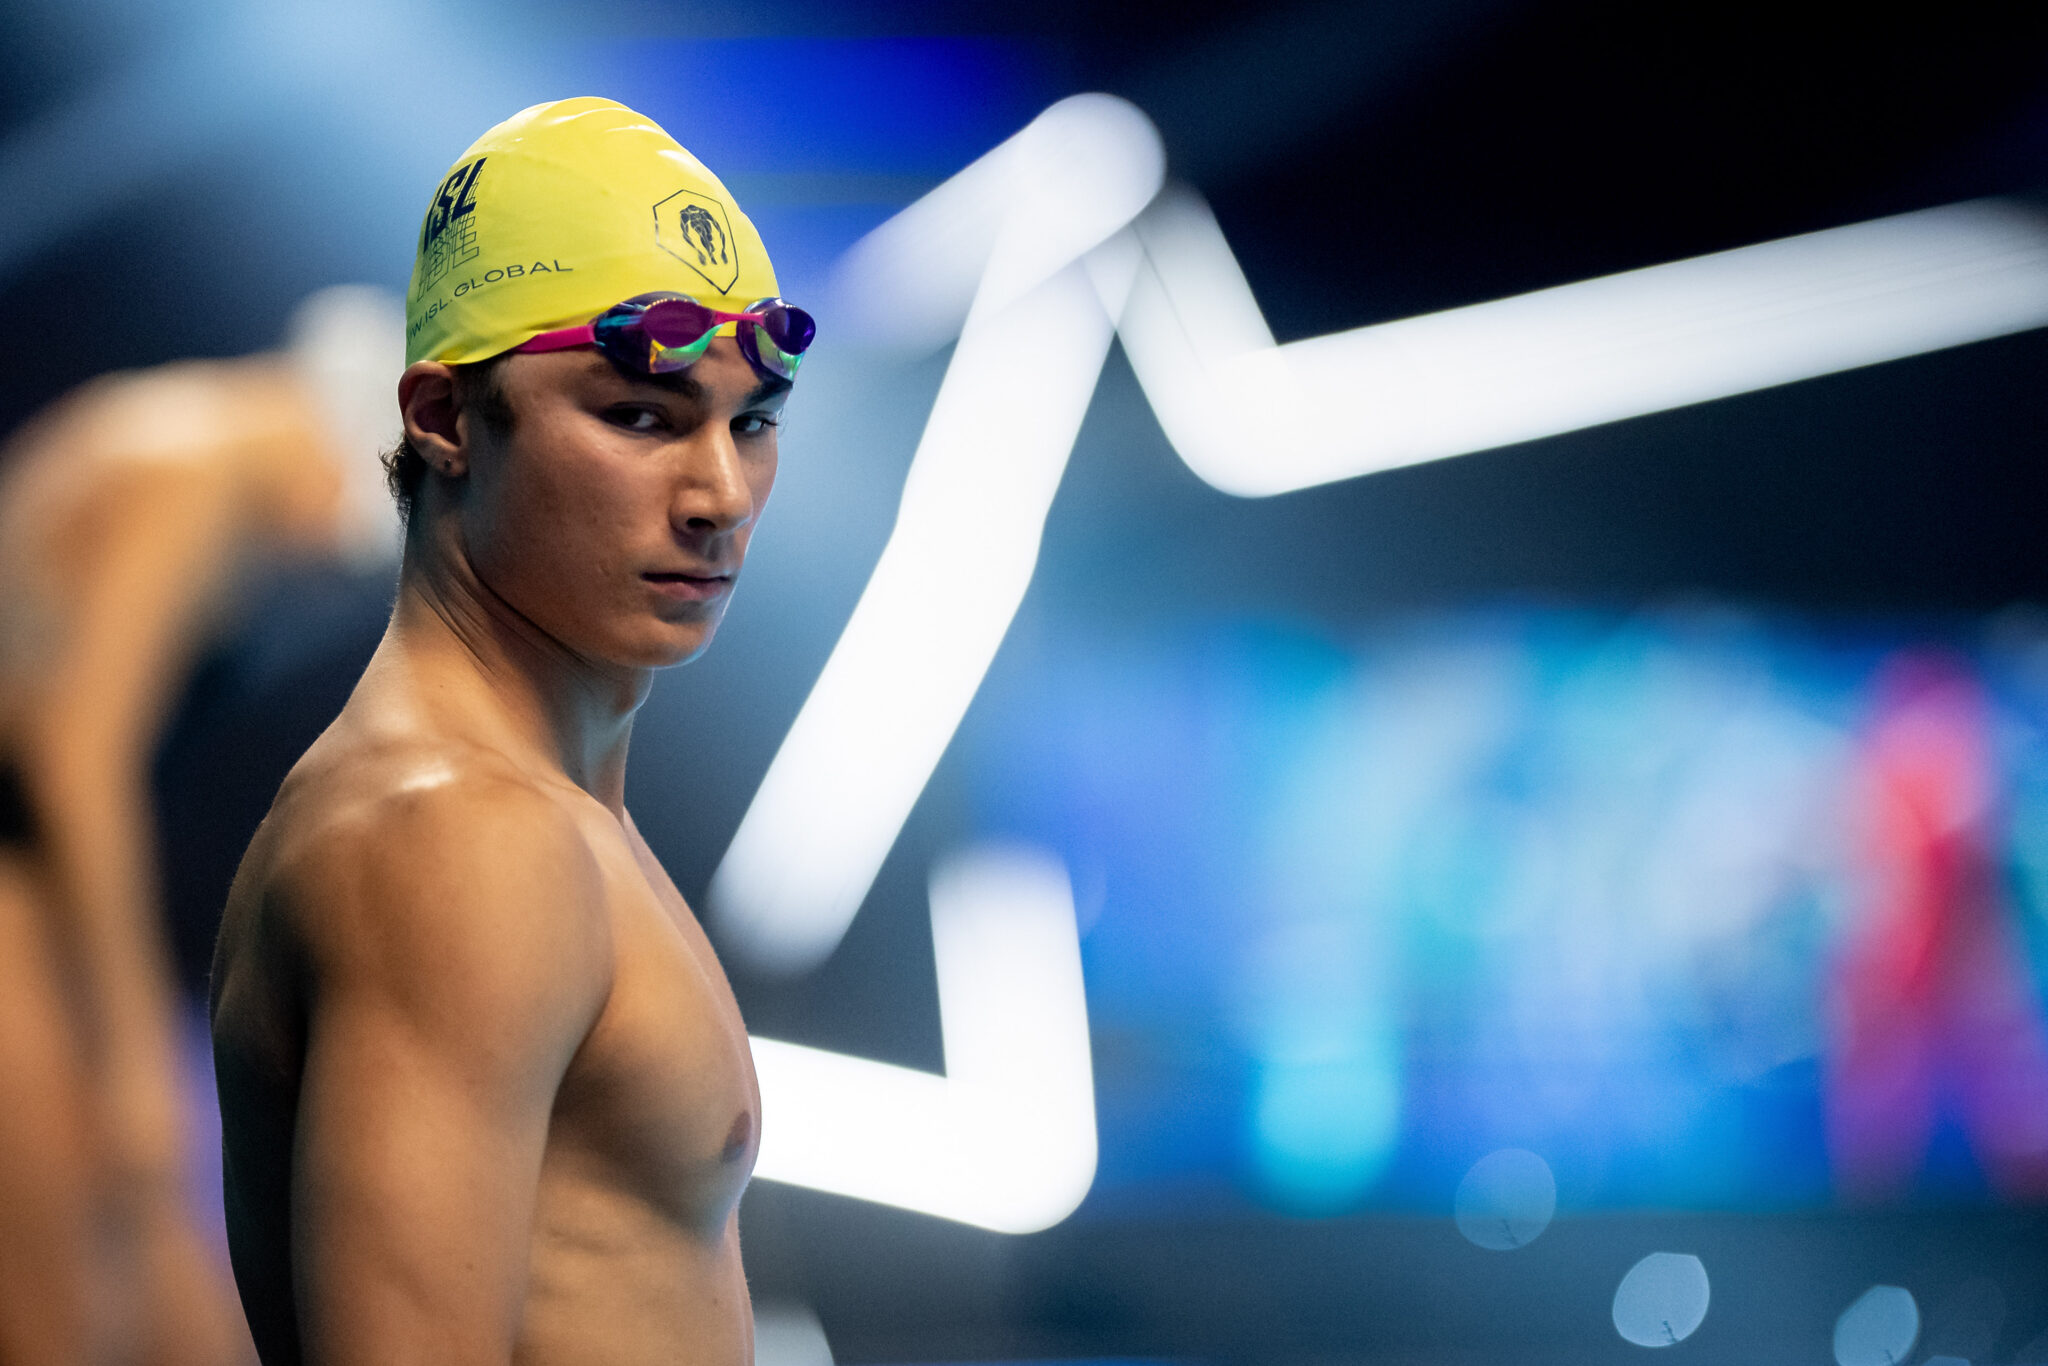 17-year-old Swimmer's Race Disqualification Overturned